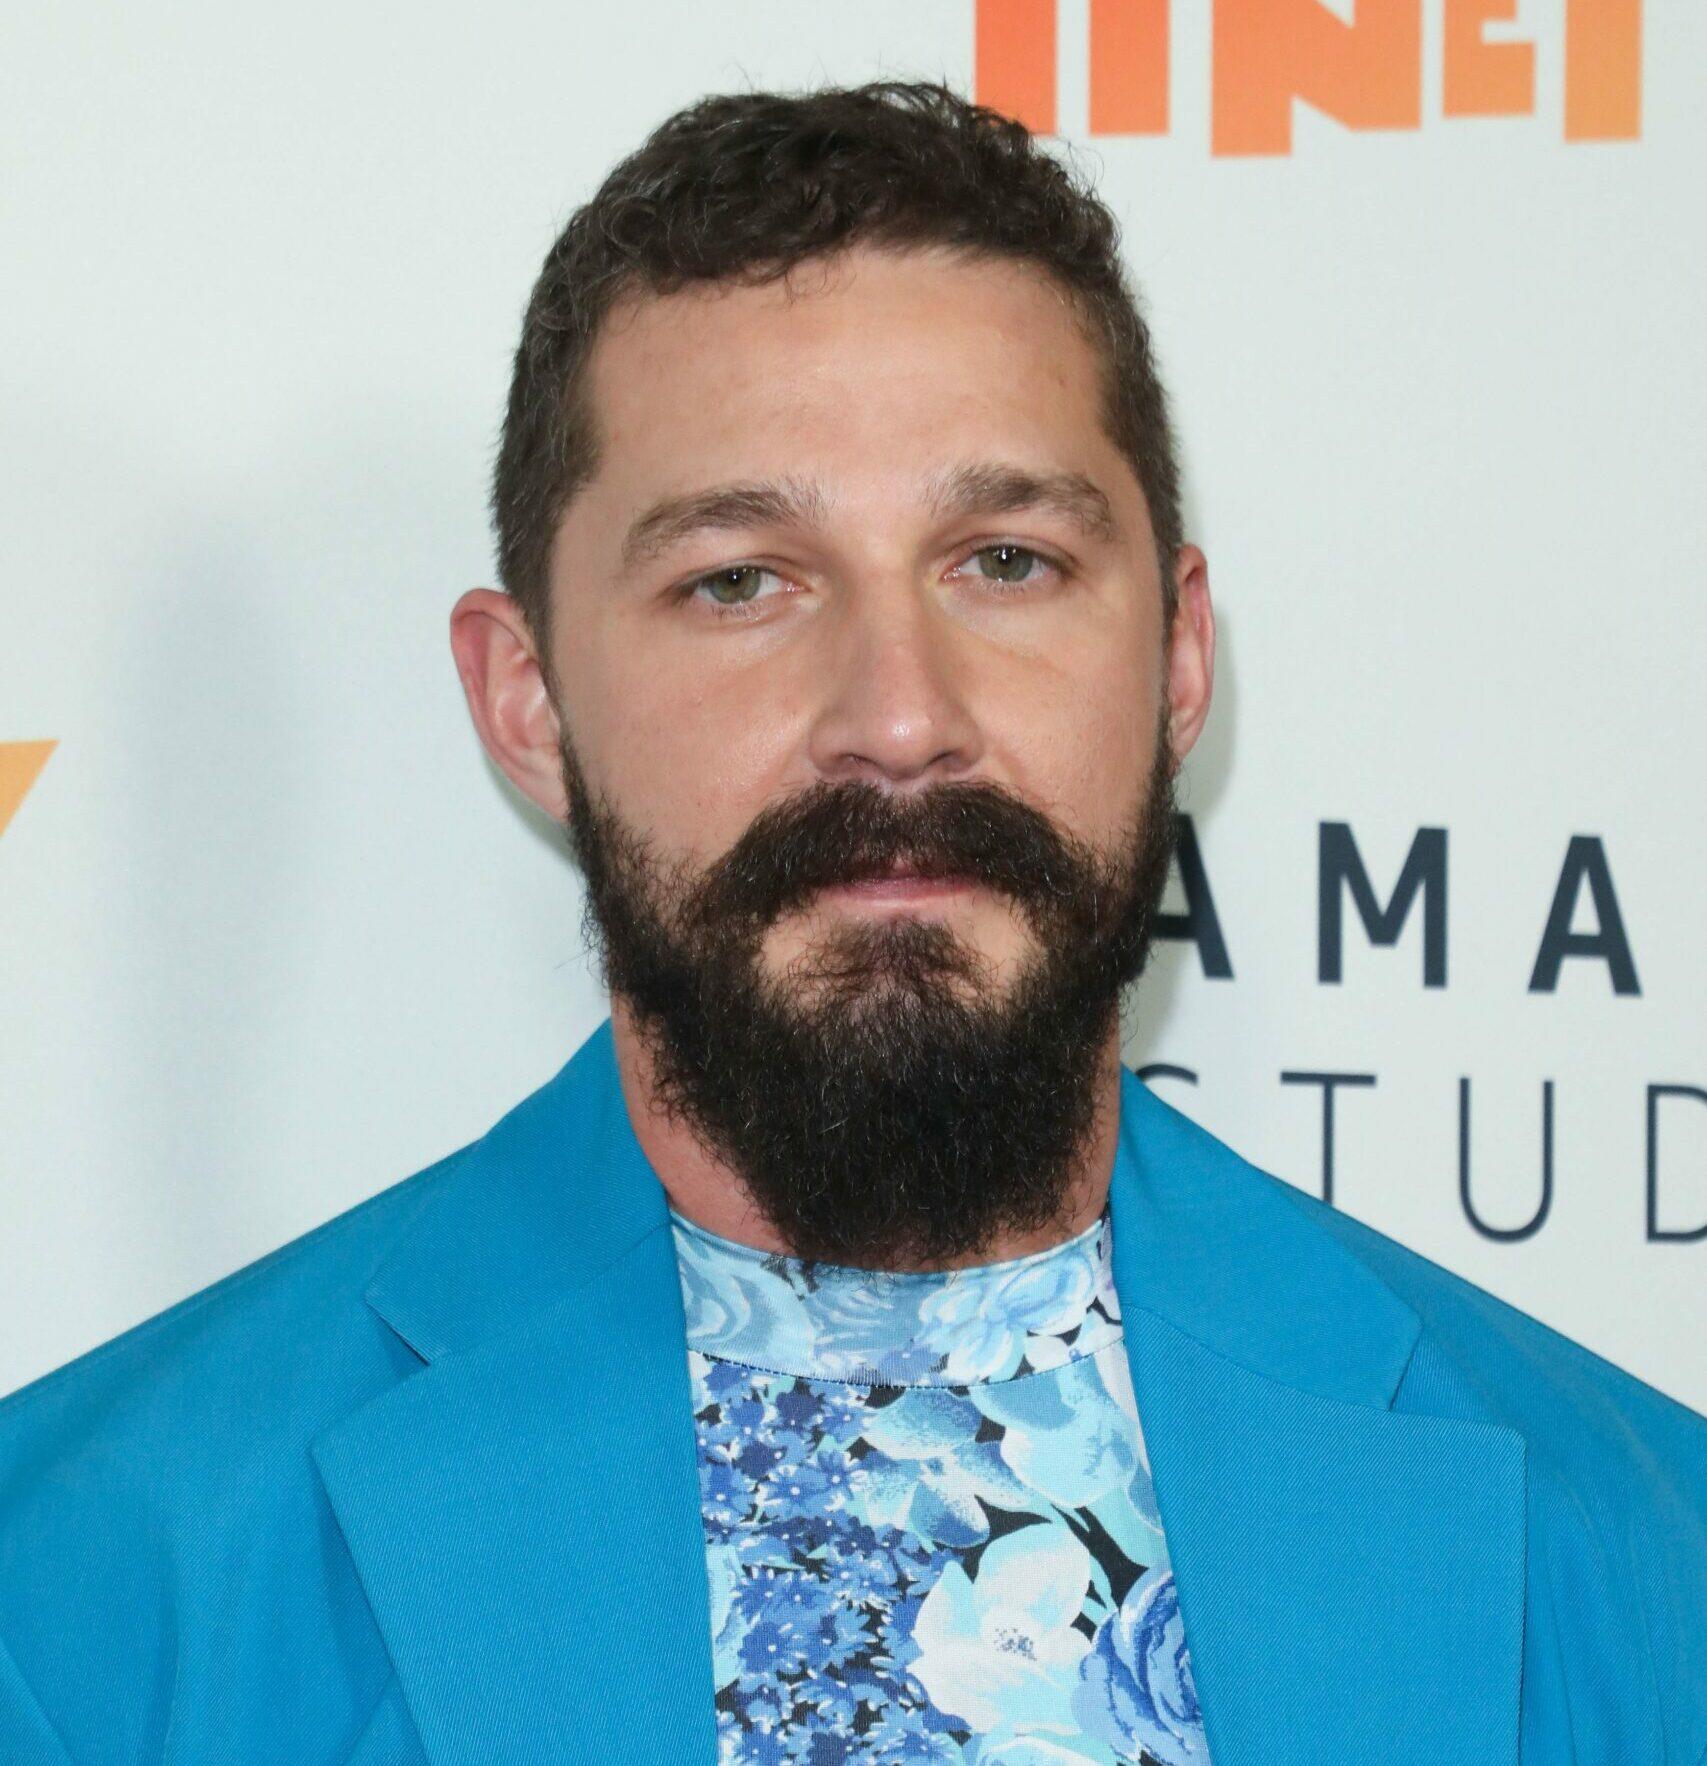 Los Angeles Premiere Of Amazon Studios' 'Honey Boy' held at ArcLight Cinemas Hollywood Cinerama Dome on November 5, 2019 in Hollywood, Los Angeles, California, United States. 05 Nov 2019 Pictured: Shia LaBeouf.